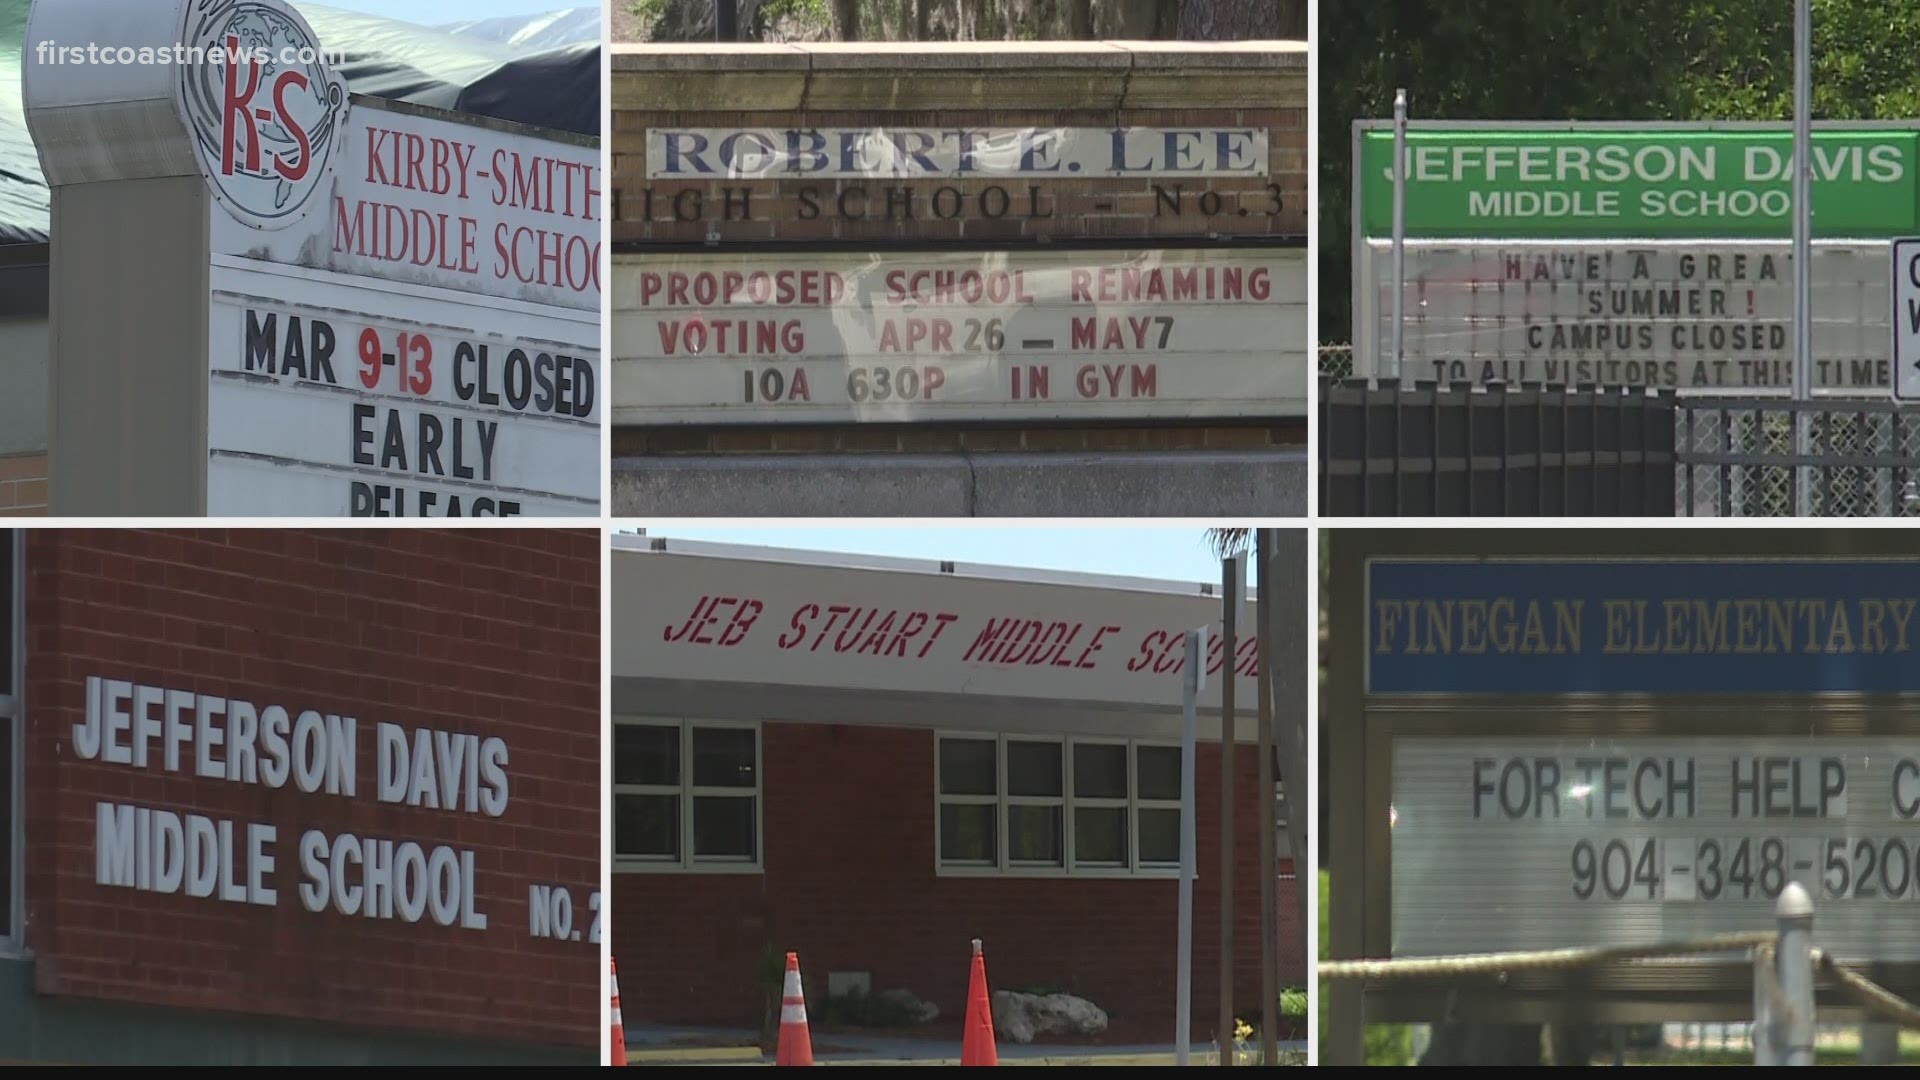 The superintendent has recommended six schools to be renamed. These schools are named after Confederate figures.